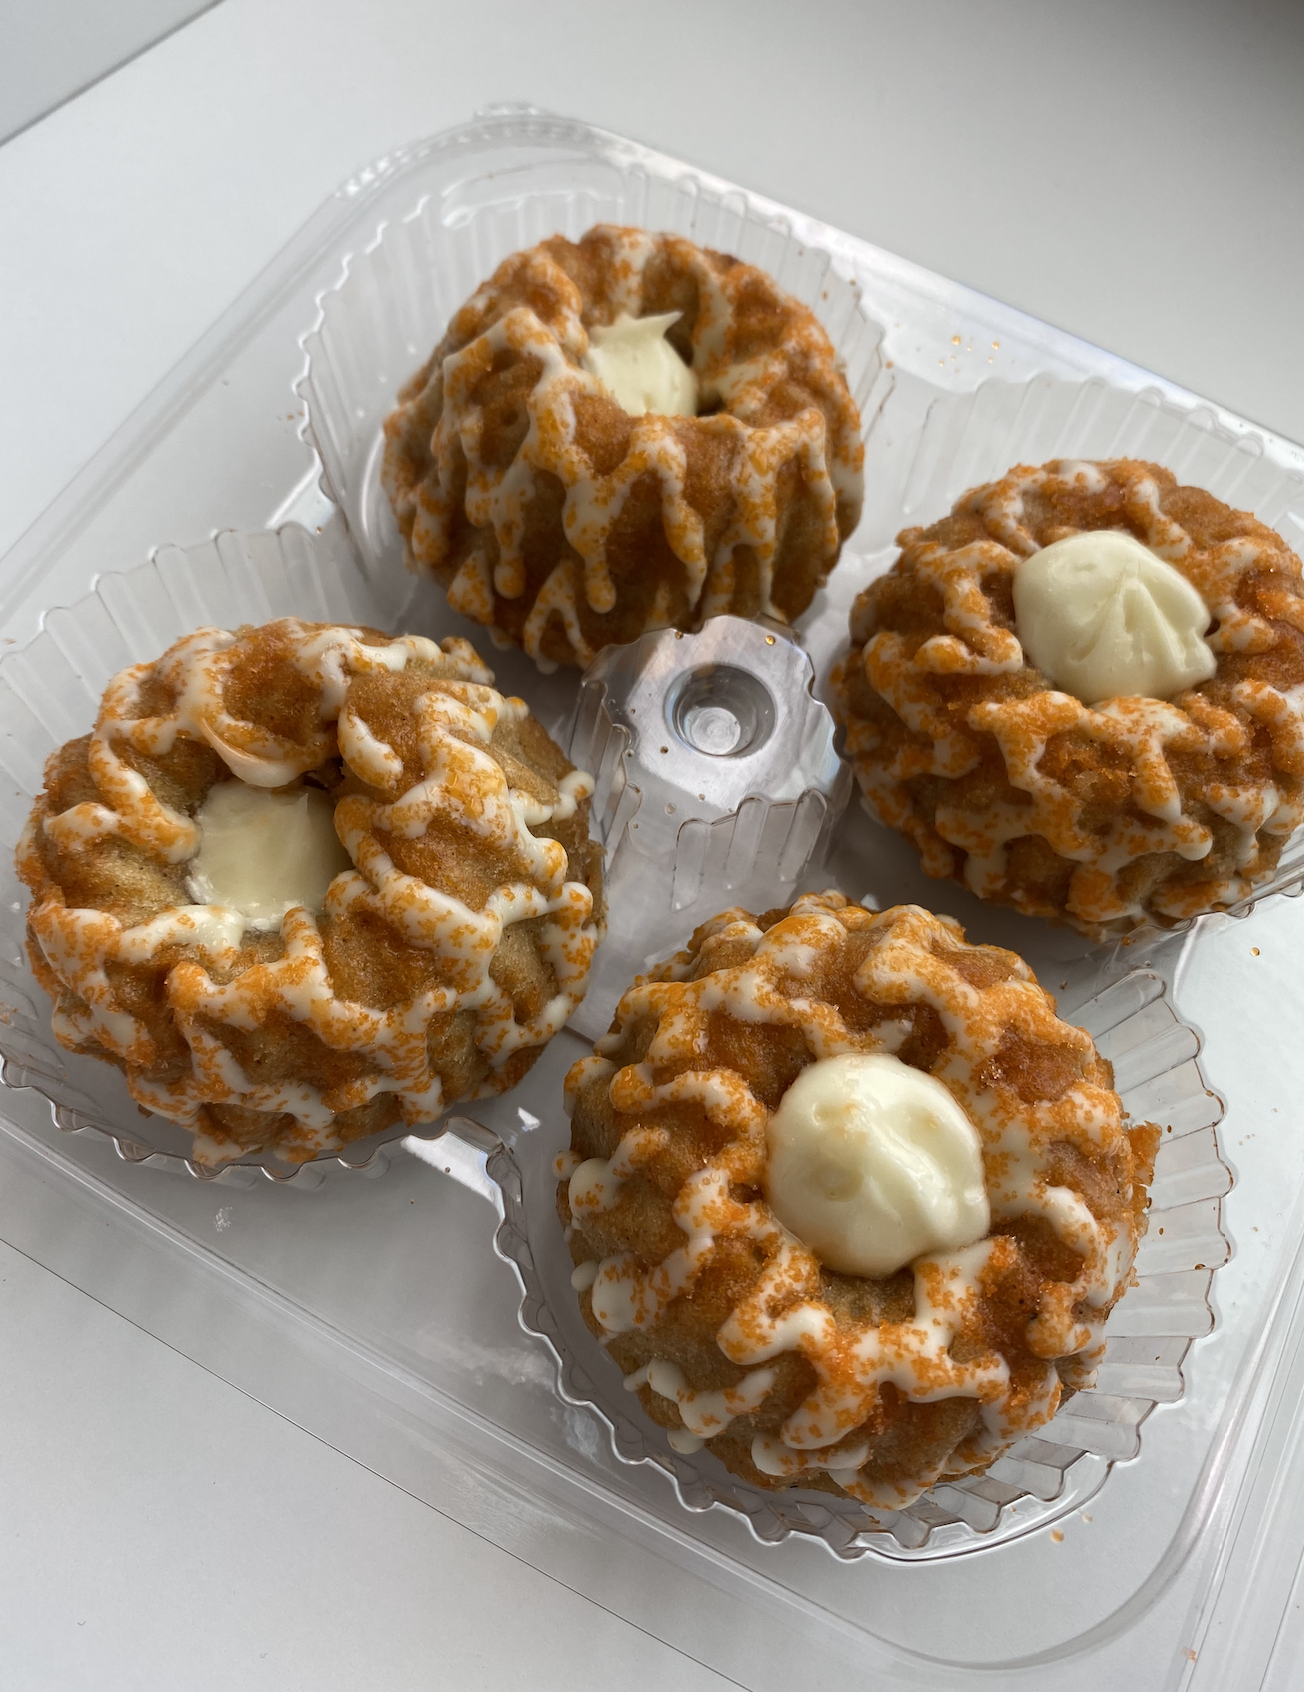 Pumpkin Petite Bundt Cakes (with cream cheese frosting)